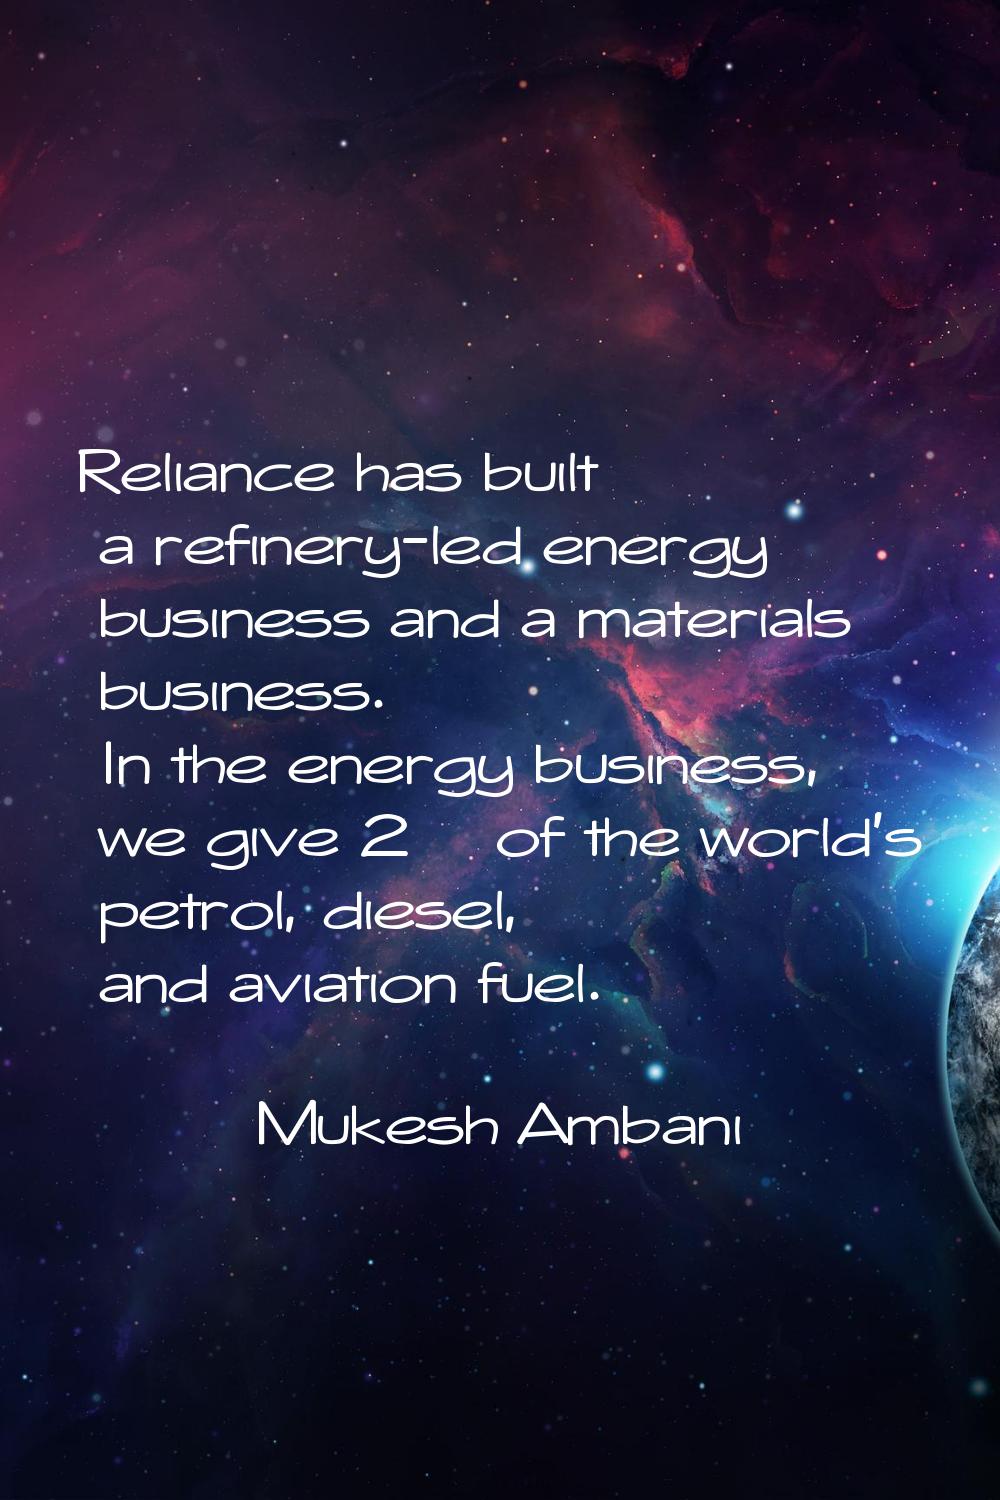 Reliance has built a refinery-led energy business and a materials business. In the energy business,